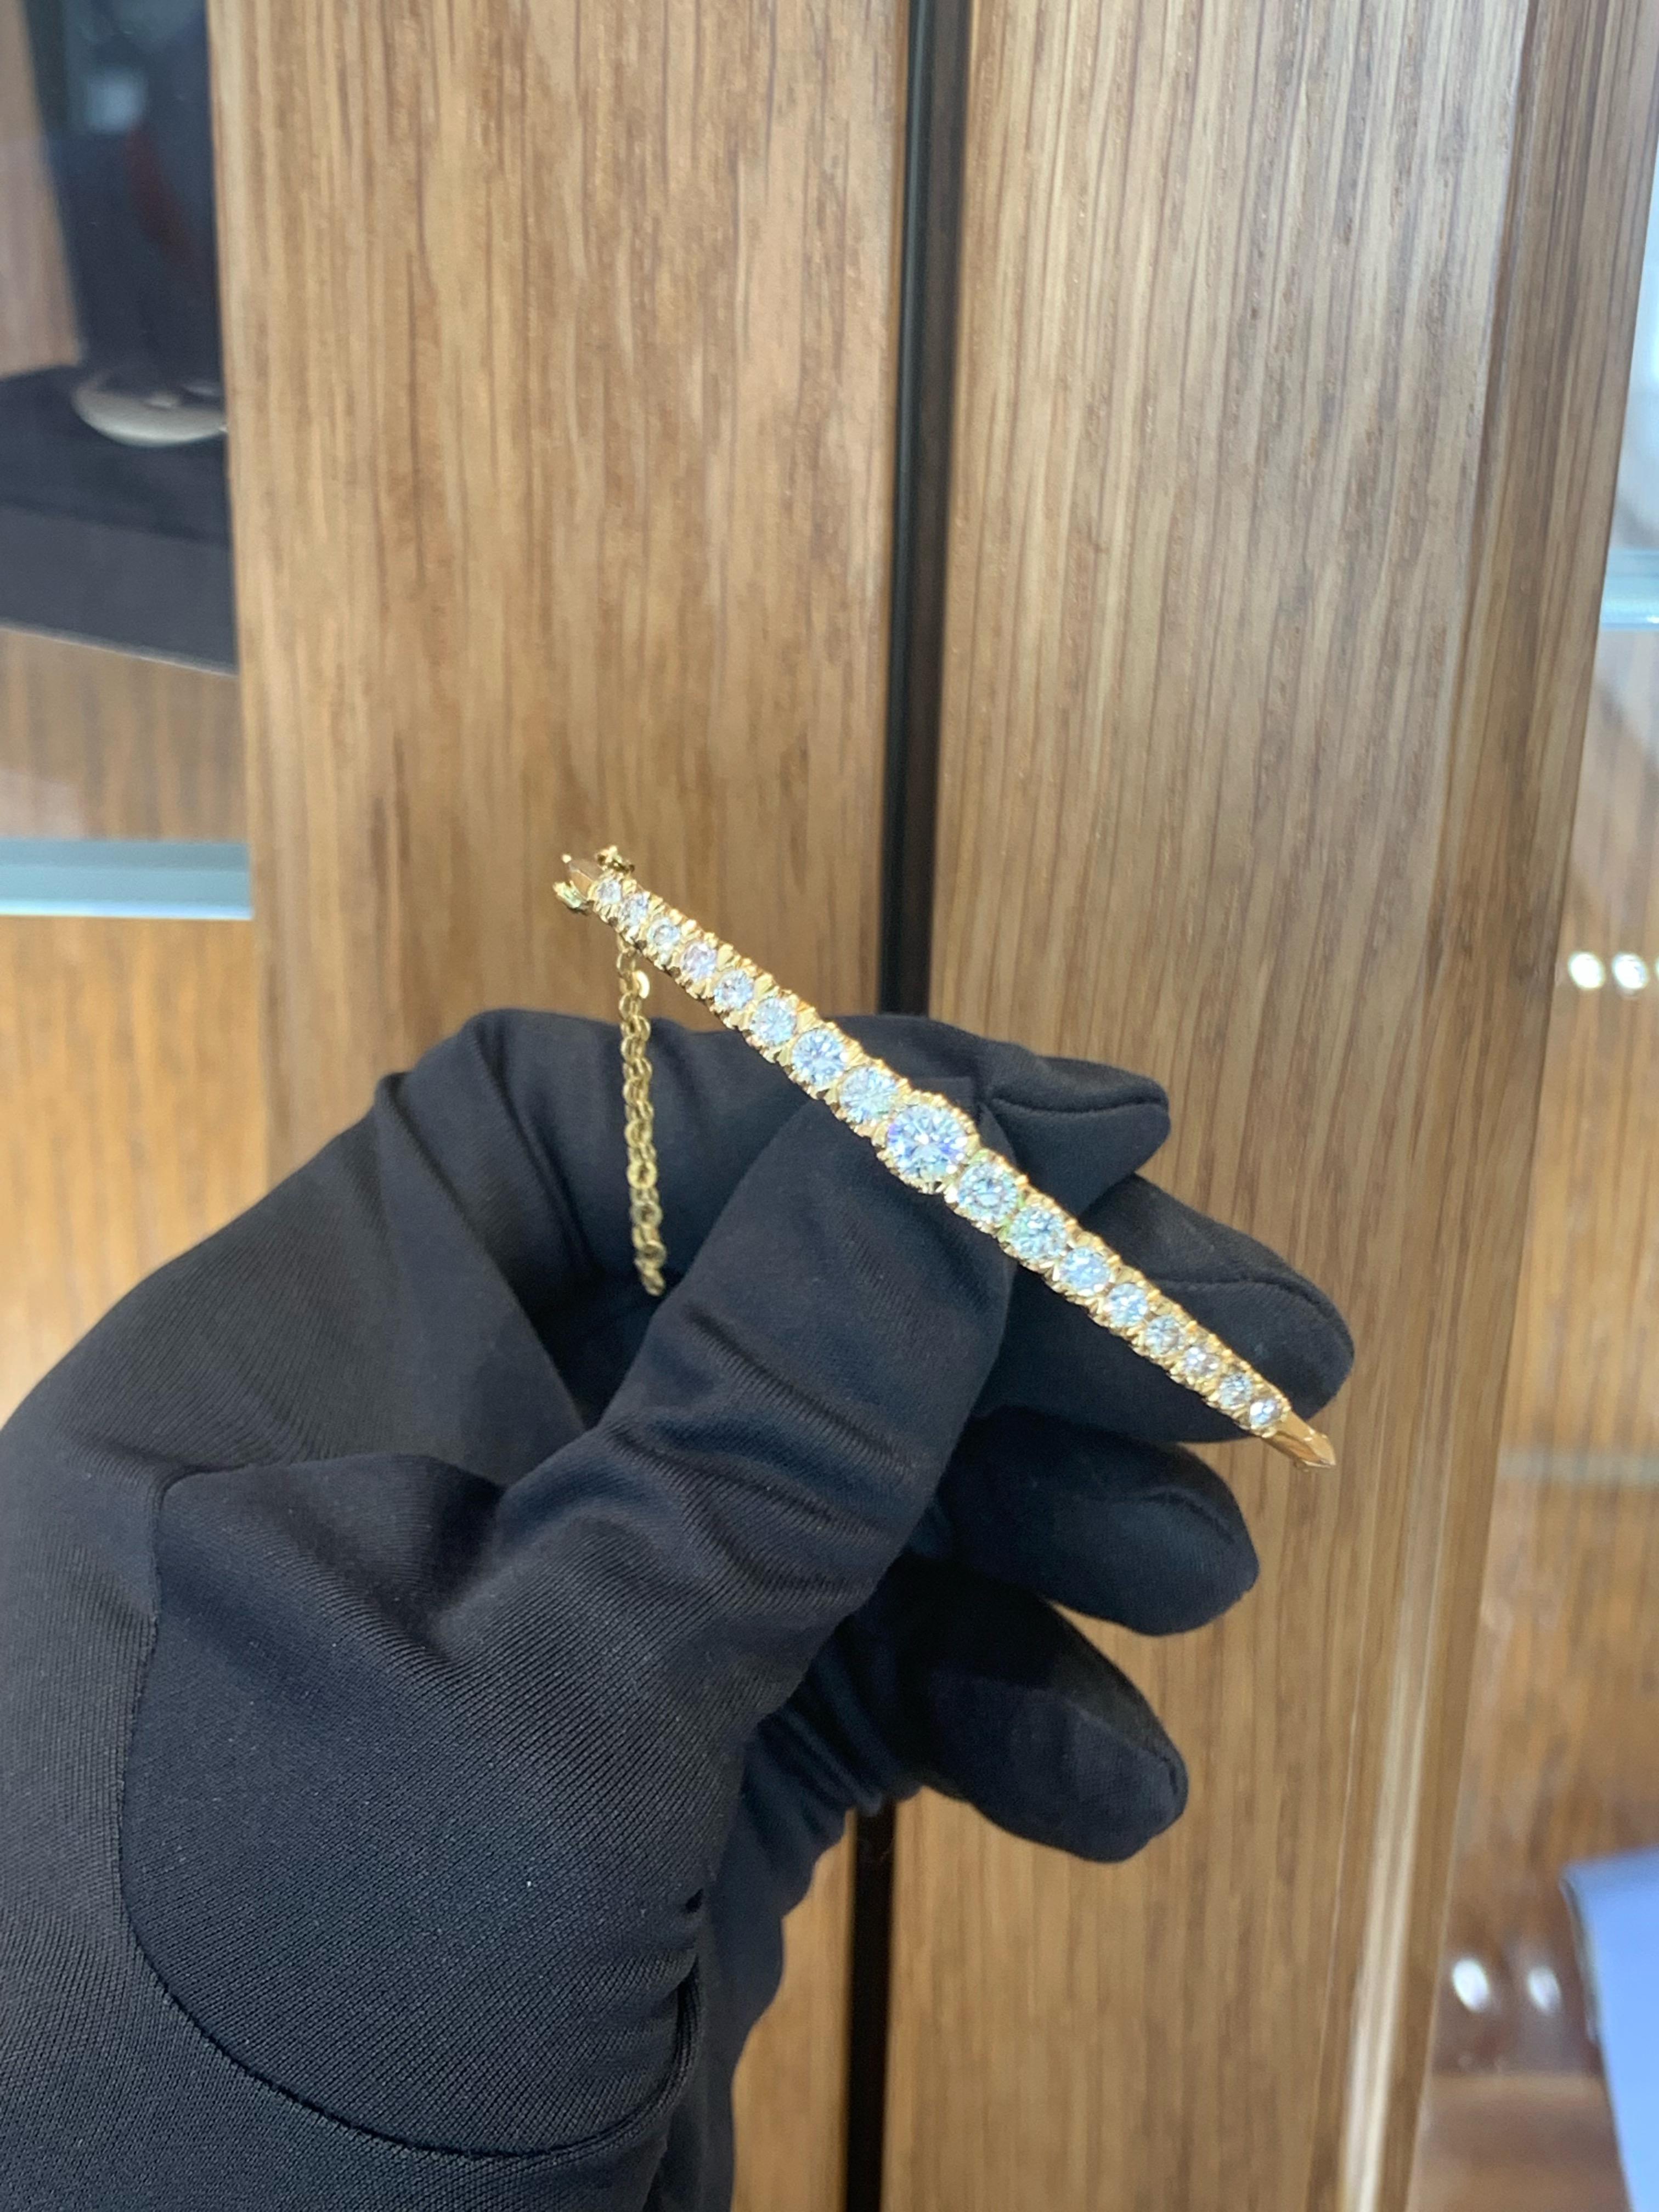 Beautifully Hand Crafted 18k Yellow Gold Diamond Bangle Bracelet.
Amazing Shine, Incredible Craftsmanship.
Approximately 5.0 Carats Of Diamonds.
Nice & Clean Goods.
Large Stones. 
Great Statement Piece.
Beautifully Graduated From The Bigger, Center